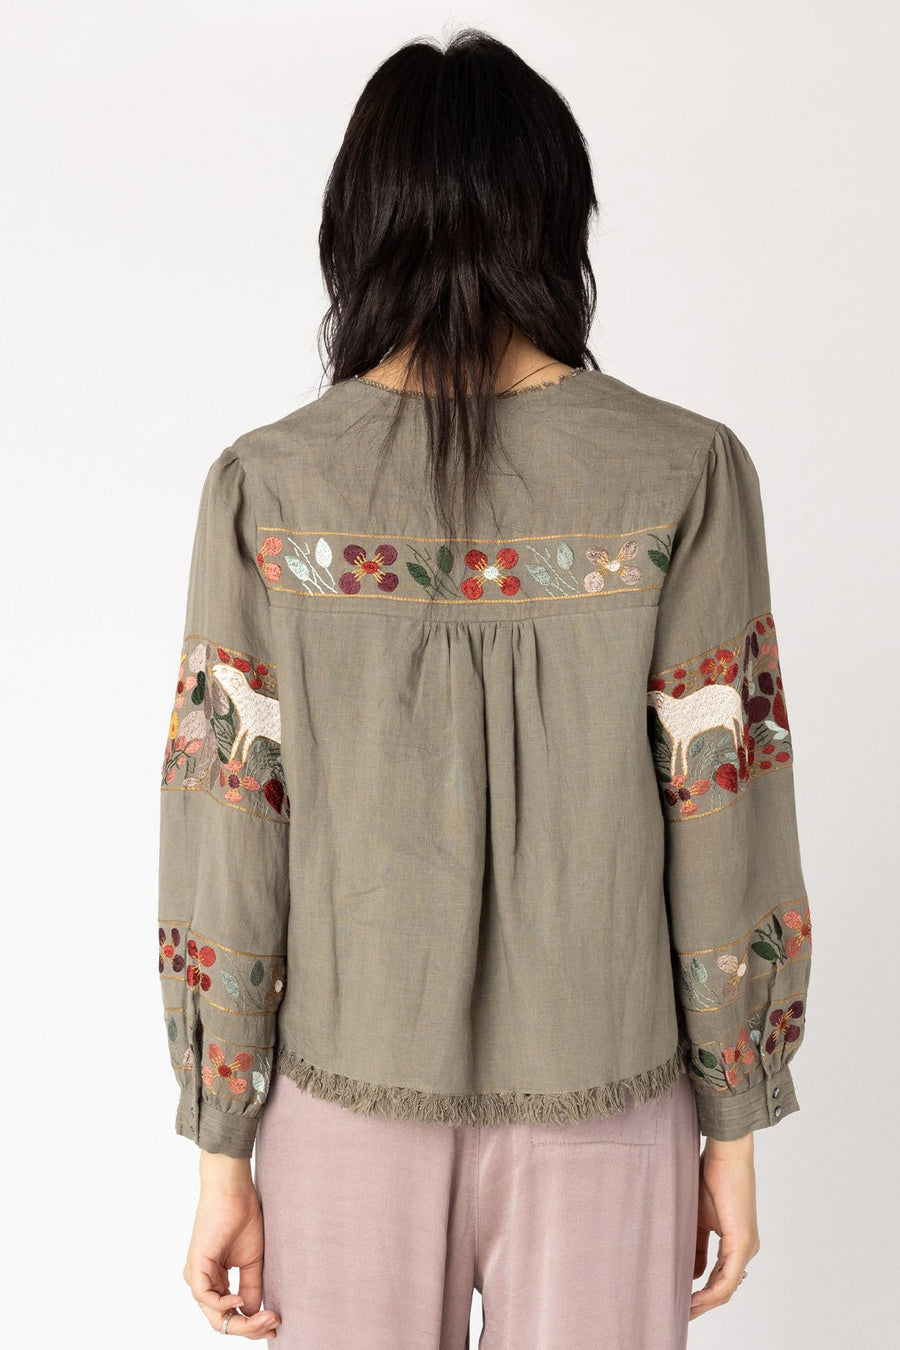 UXMAL LONG SLEEVE EMBROIDERED TOP, ARMY - Burning Torch Online Boutique